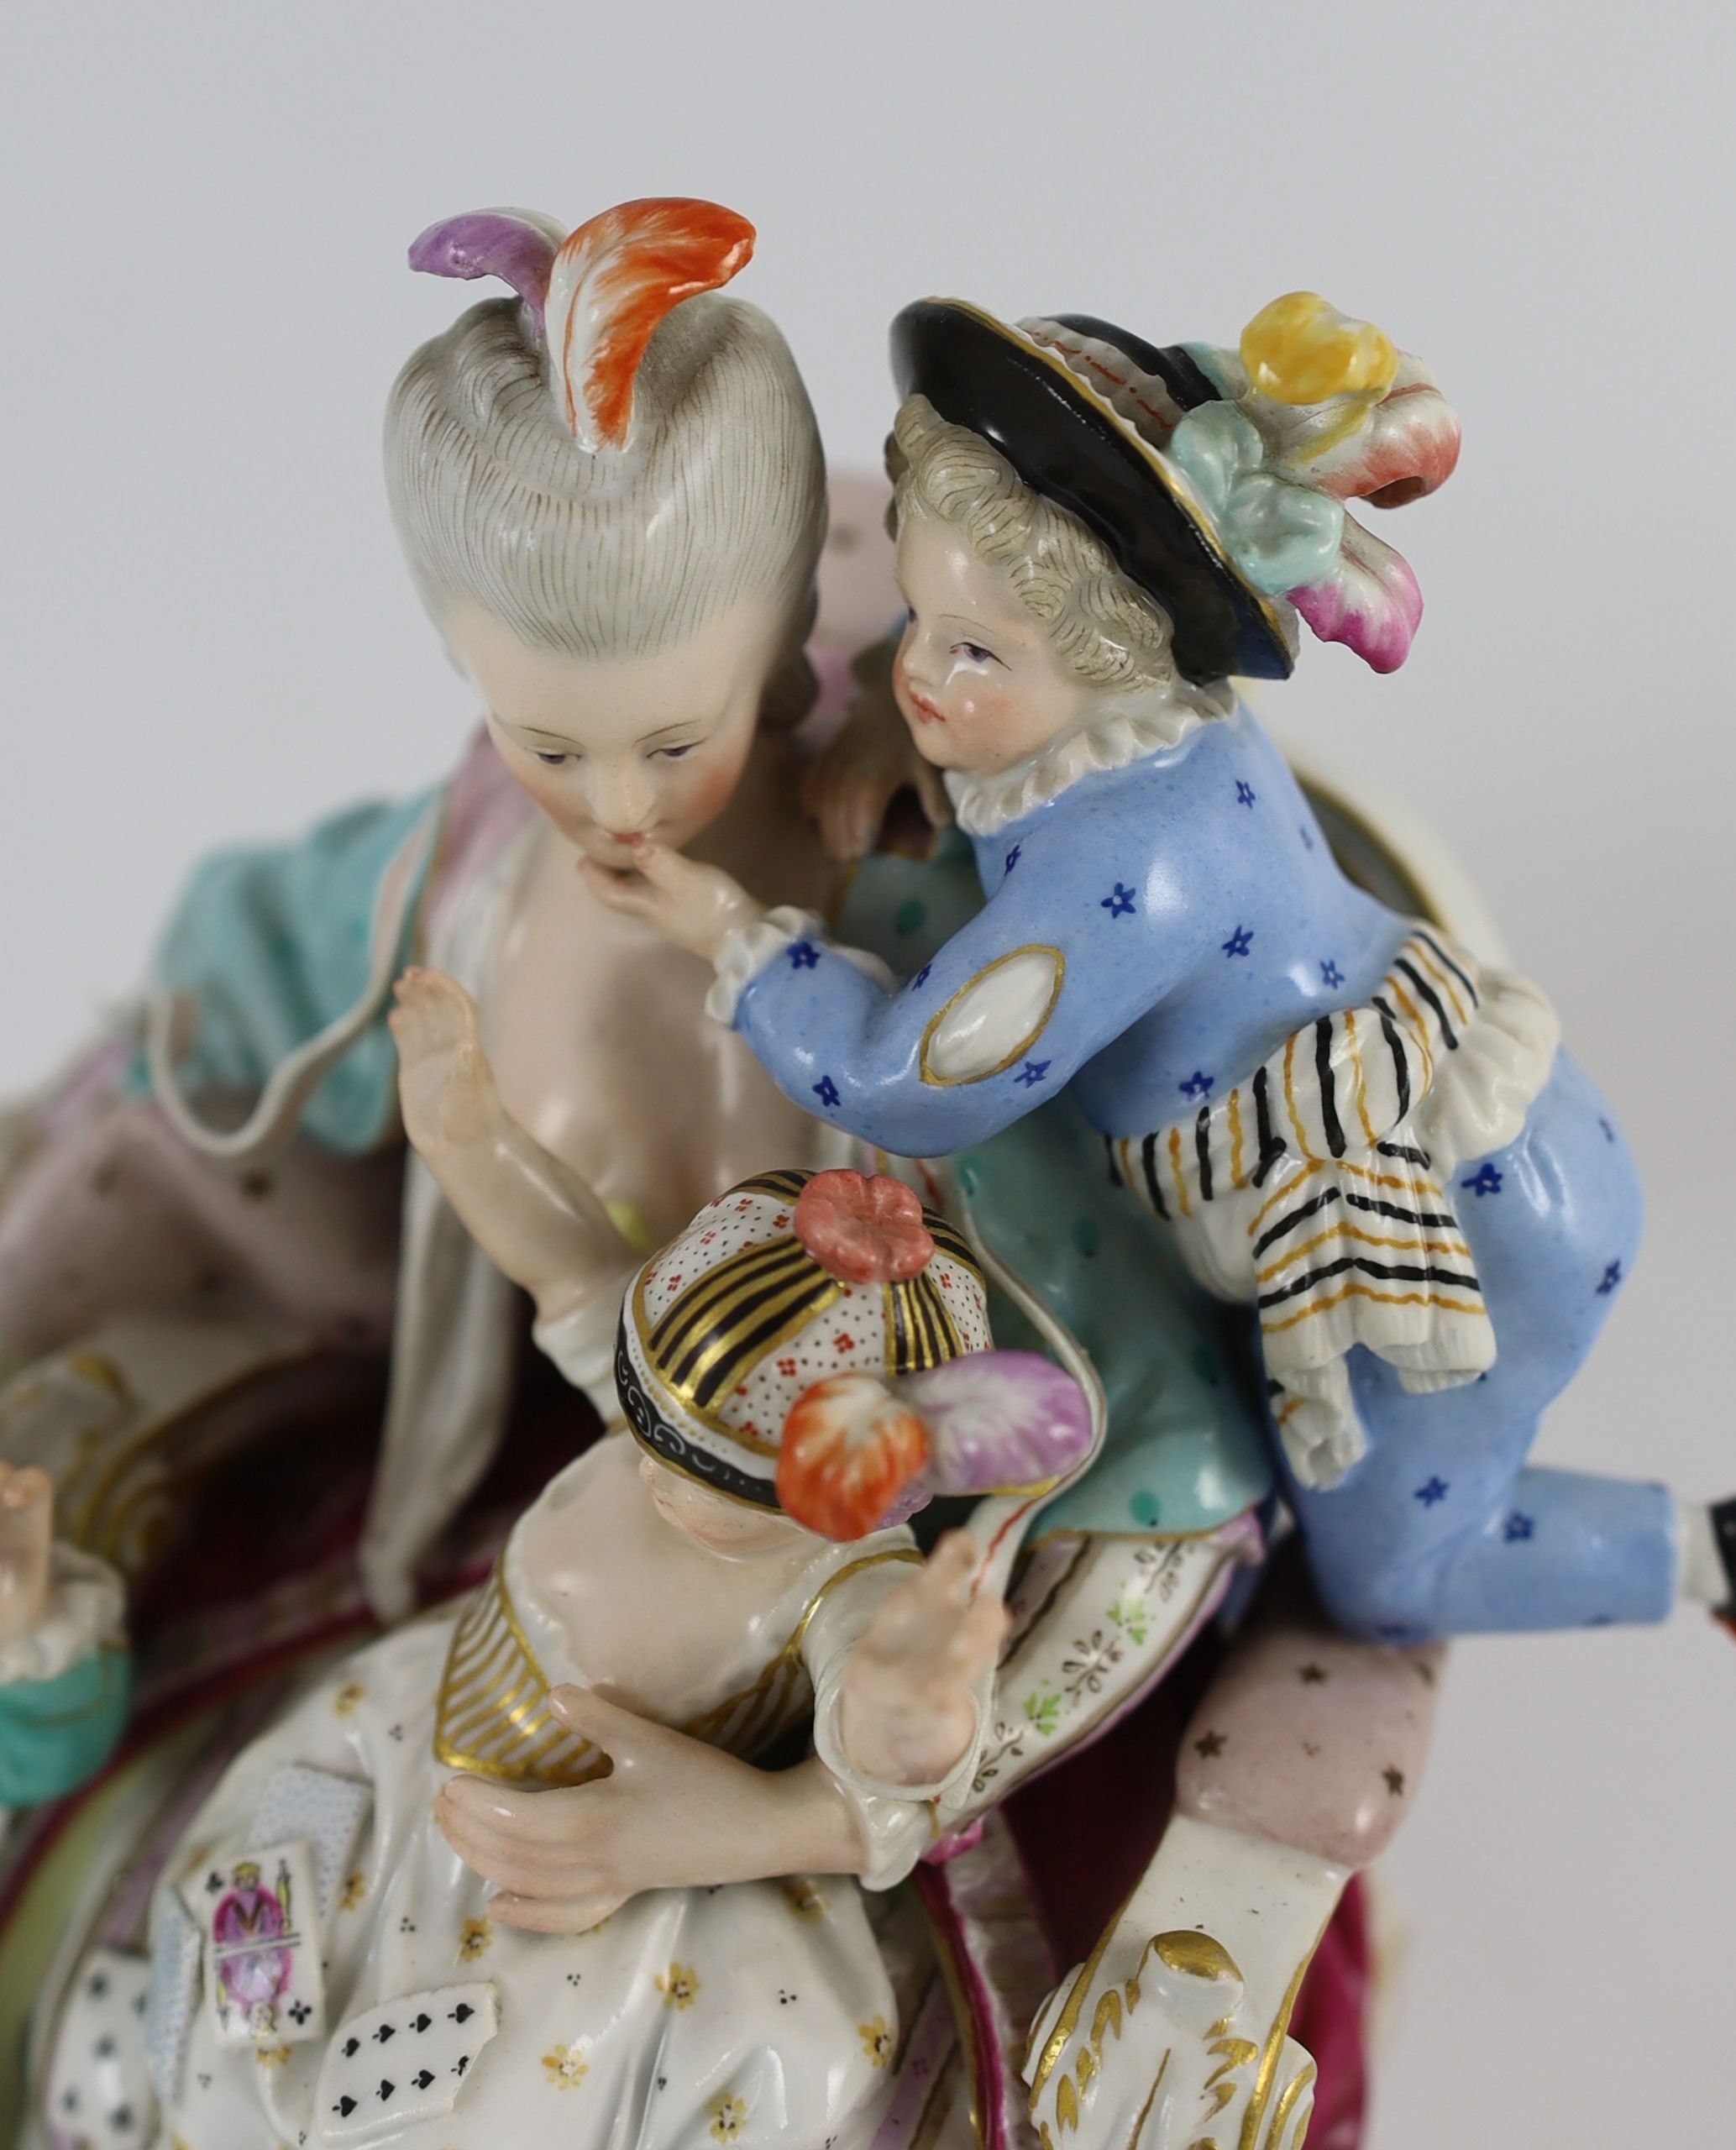 A Meissen group of the good mother, 19th century, after a model by Michel Victor Acier, 22 cm high